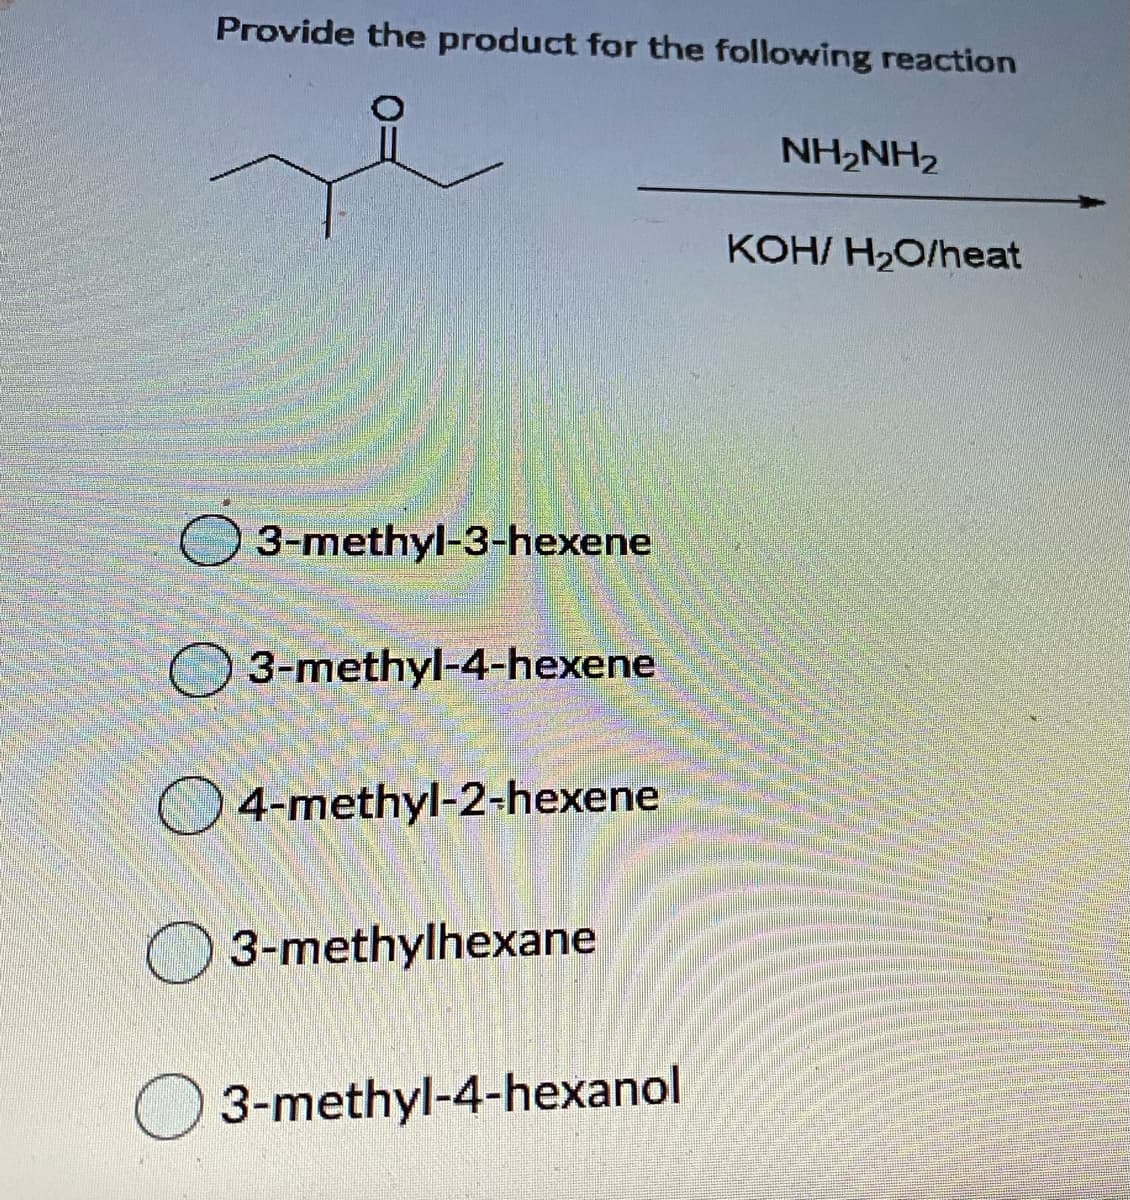 Provide the product for the following reaction
NH2NH2
KOH/ H2O/heat
3-methyl-3-hexene
3-methyl-4-hexene
4-methyl-2-hexene
3-methylhexane
O 3-methyl-4-hexanol
